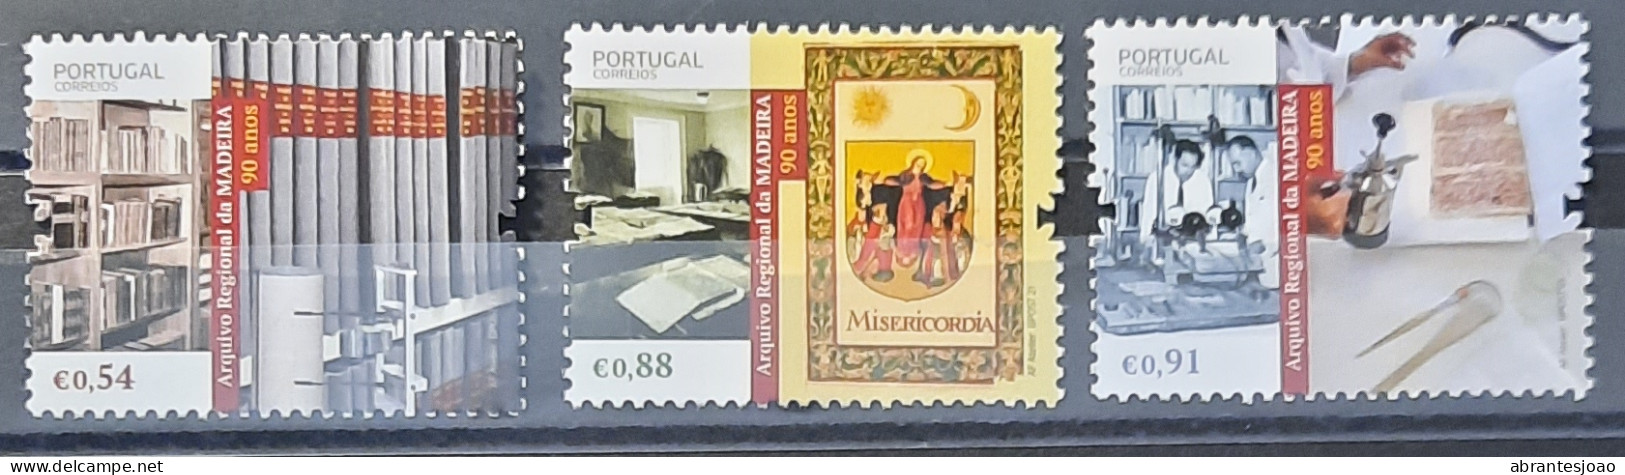 2021 - Portugal - MNH - 90 Years Of Regional Archives Of Madeira - 3 Stamps - Ongebruikt